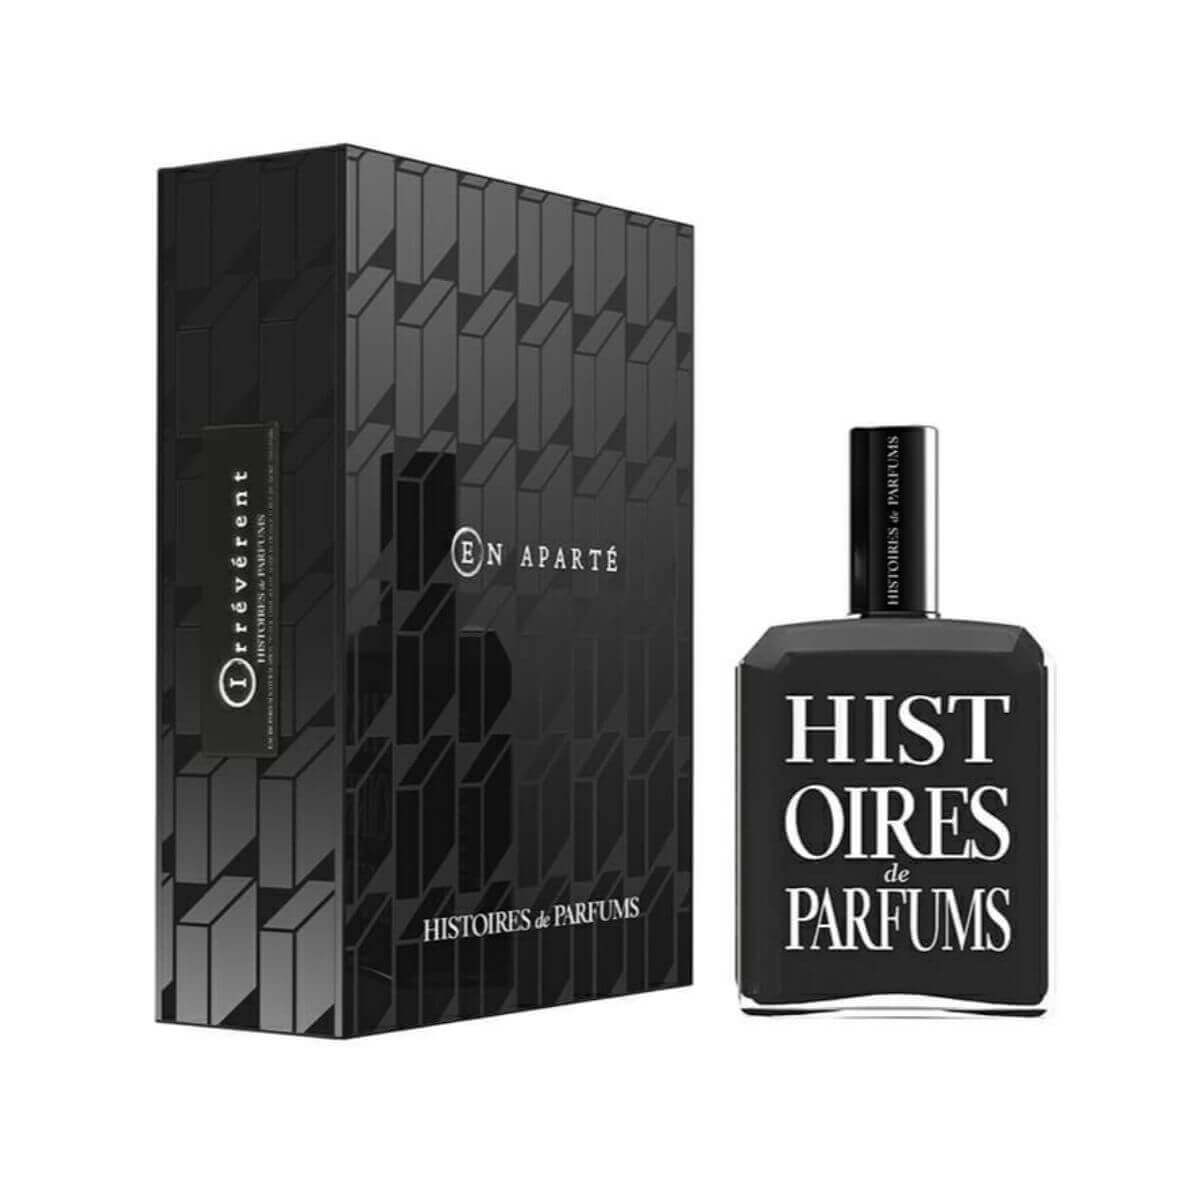 Histoires De Parfum – Irreverent, A Woody Spicy Fragrance For Both Women And Menthe Sweet Freshness Of Lavender, Oud And Elemi Tingle Your Olfactory Sensesirreverent, A Fierce Scent That Fears Nobody!Top Notes: Lavender, Elemi, BergamotHeart Notes: Styrax, Coffee, OudBase Notes: Amber, Patchouli, Sandalwood.